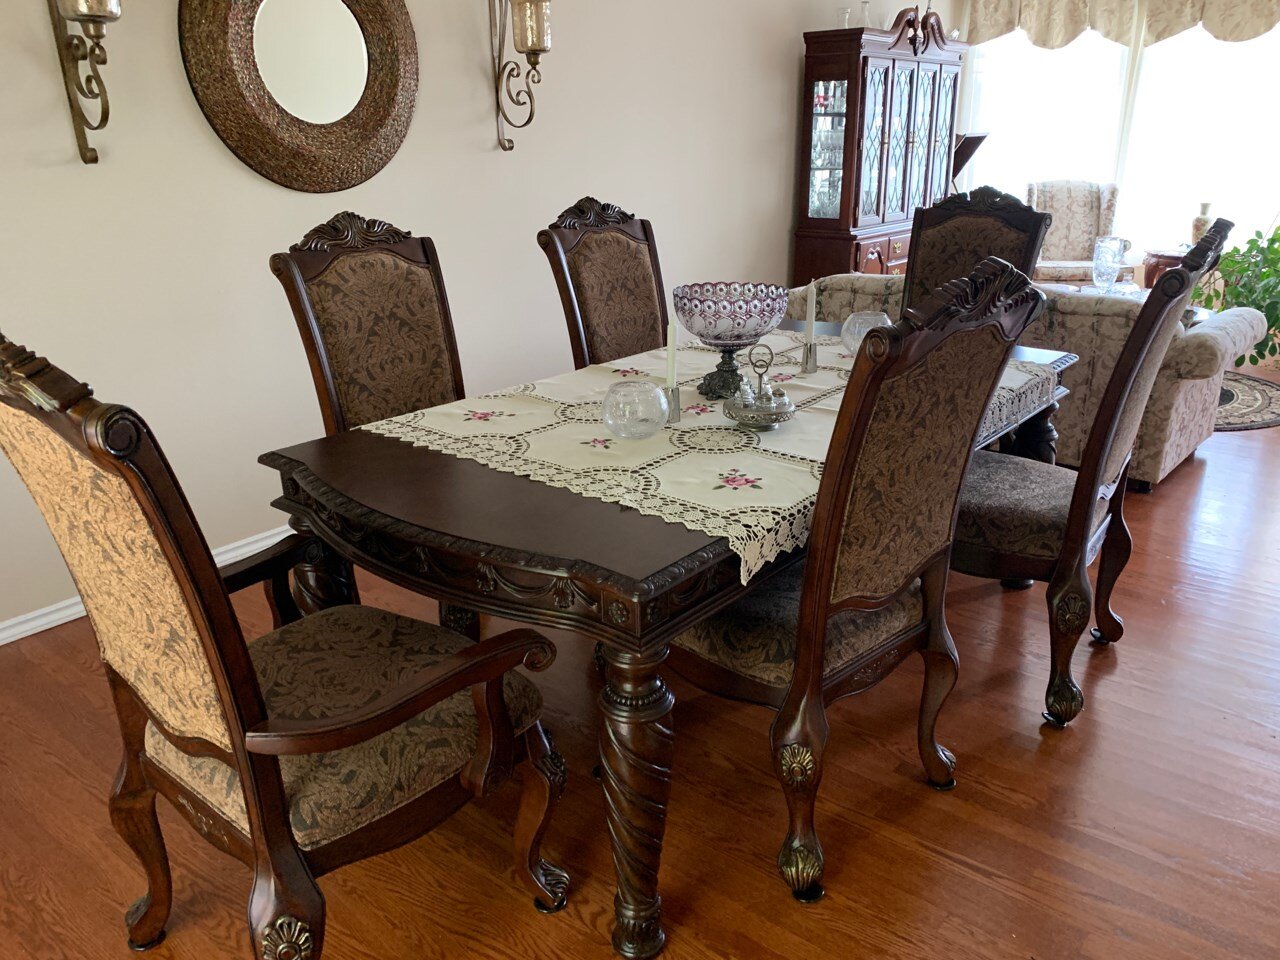 Formal dining room before fire damage restoration and repair